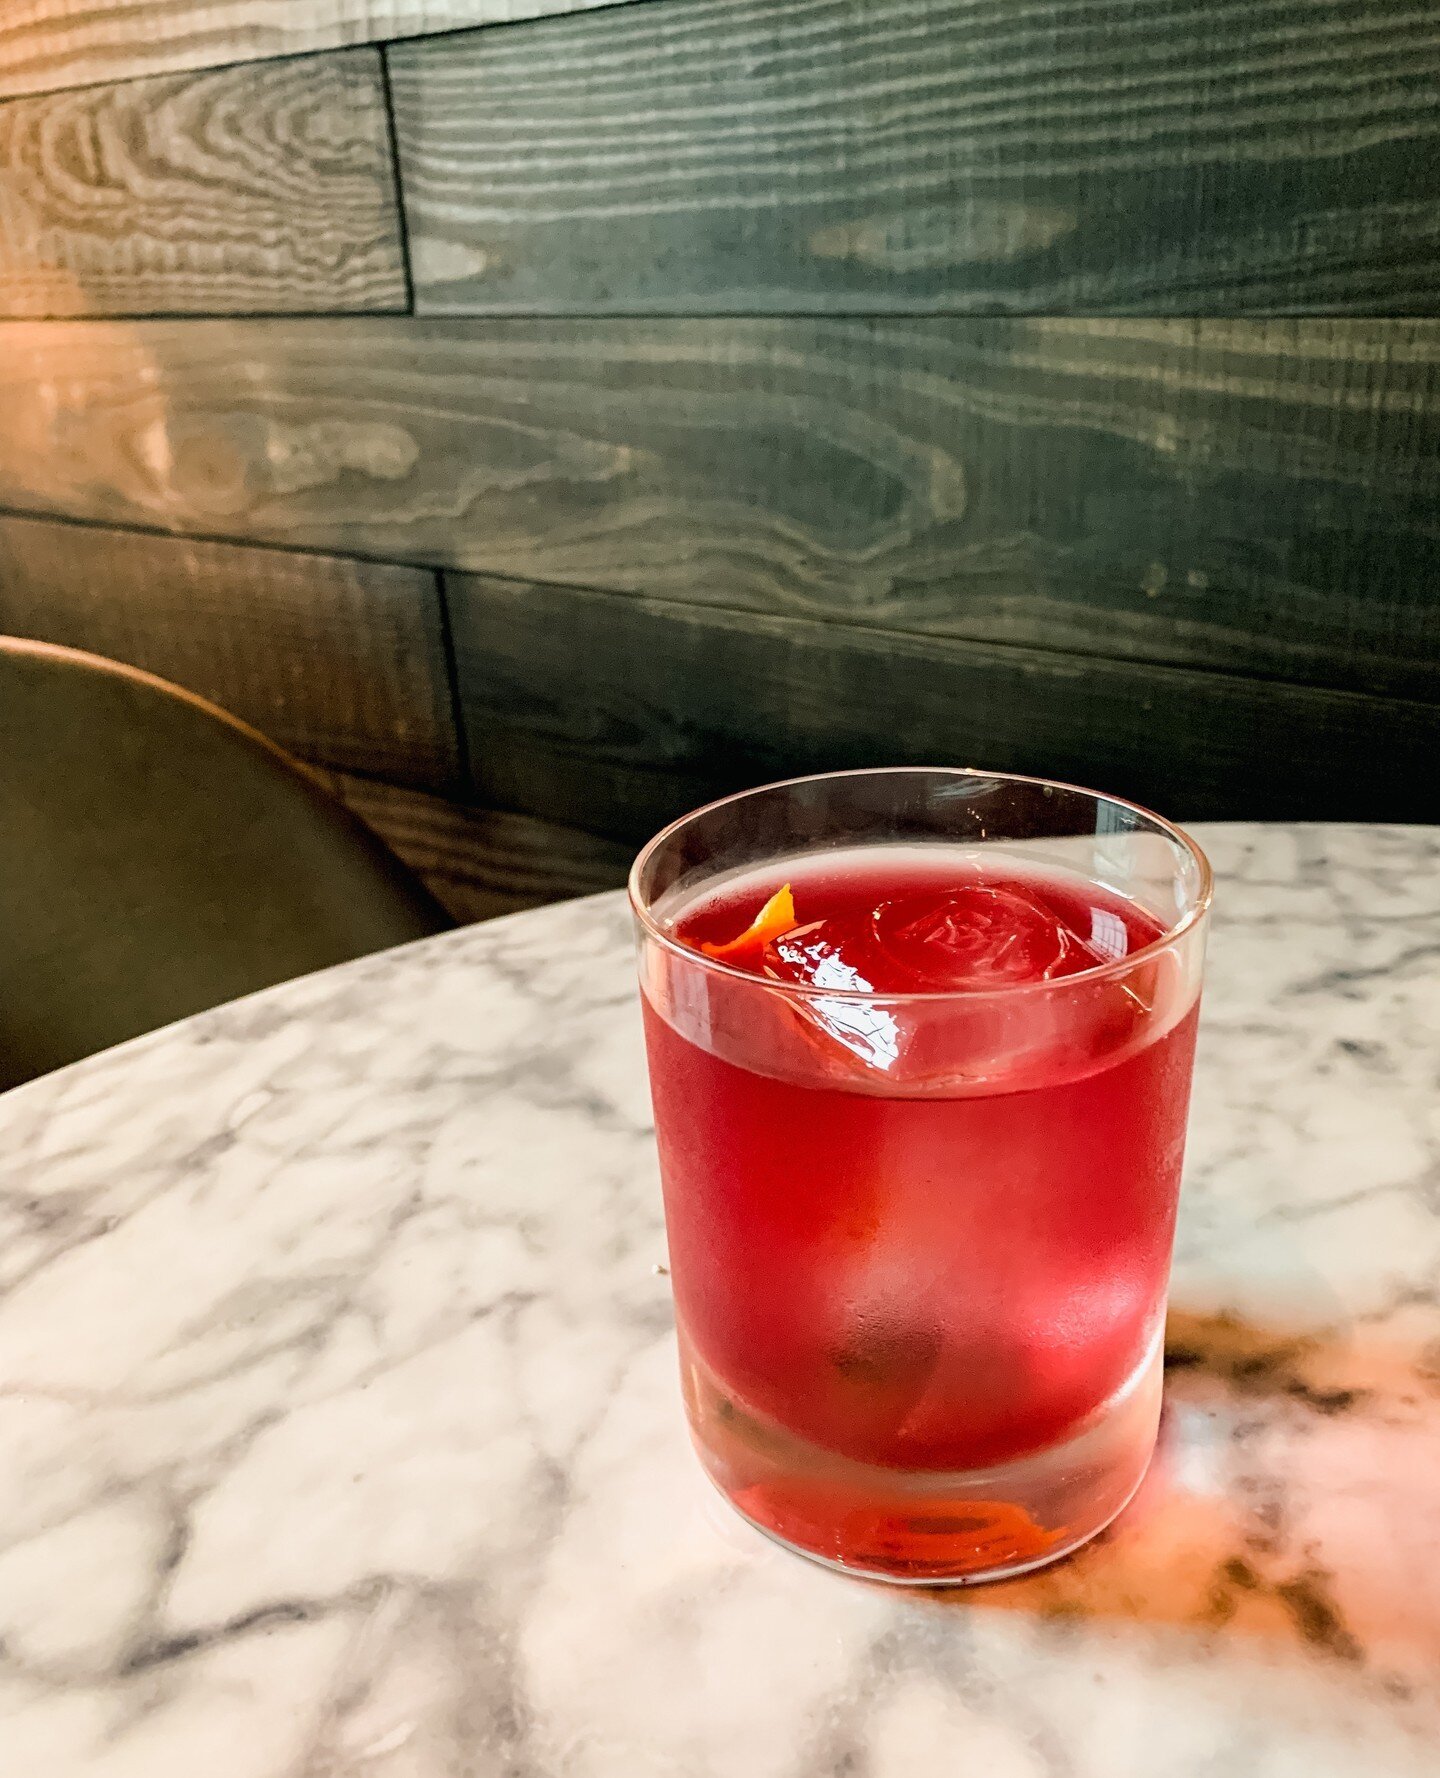 It's officially the weekend😁The Bellemara Negroni featuring our Single Malt Gin with house-made aperitivo, house-made sweet aperitif, and orange twist is a great way to celebrate.⁠
⁠
Open today 4pm-10pm.